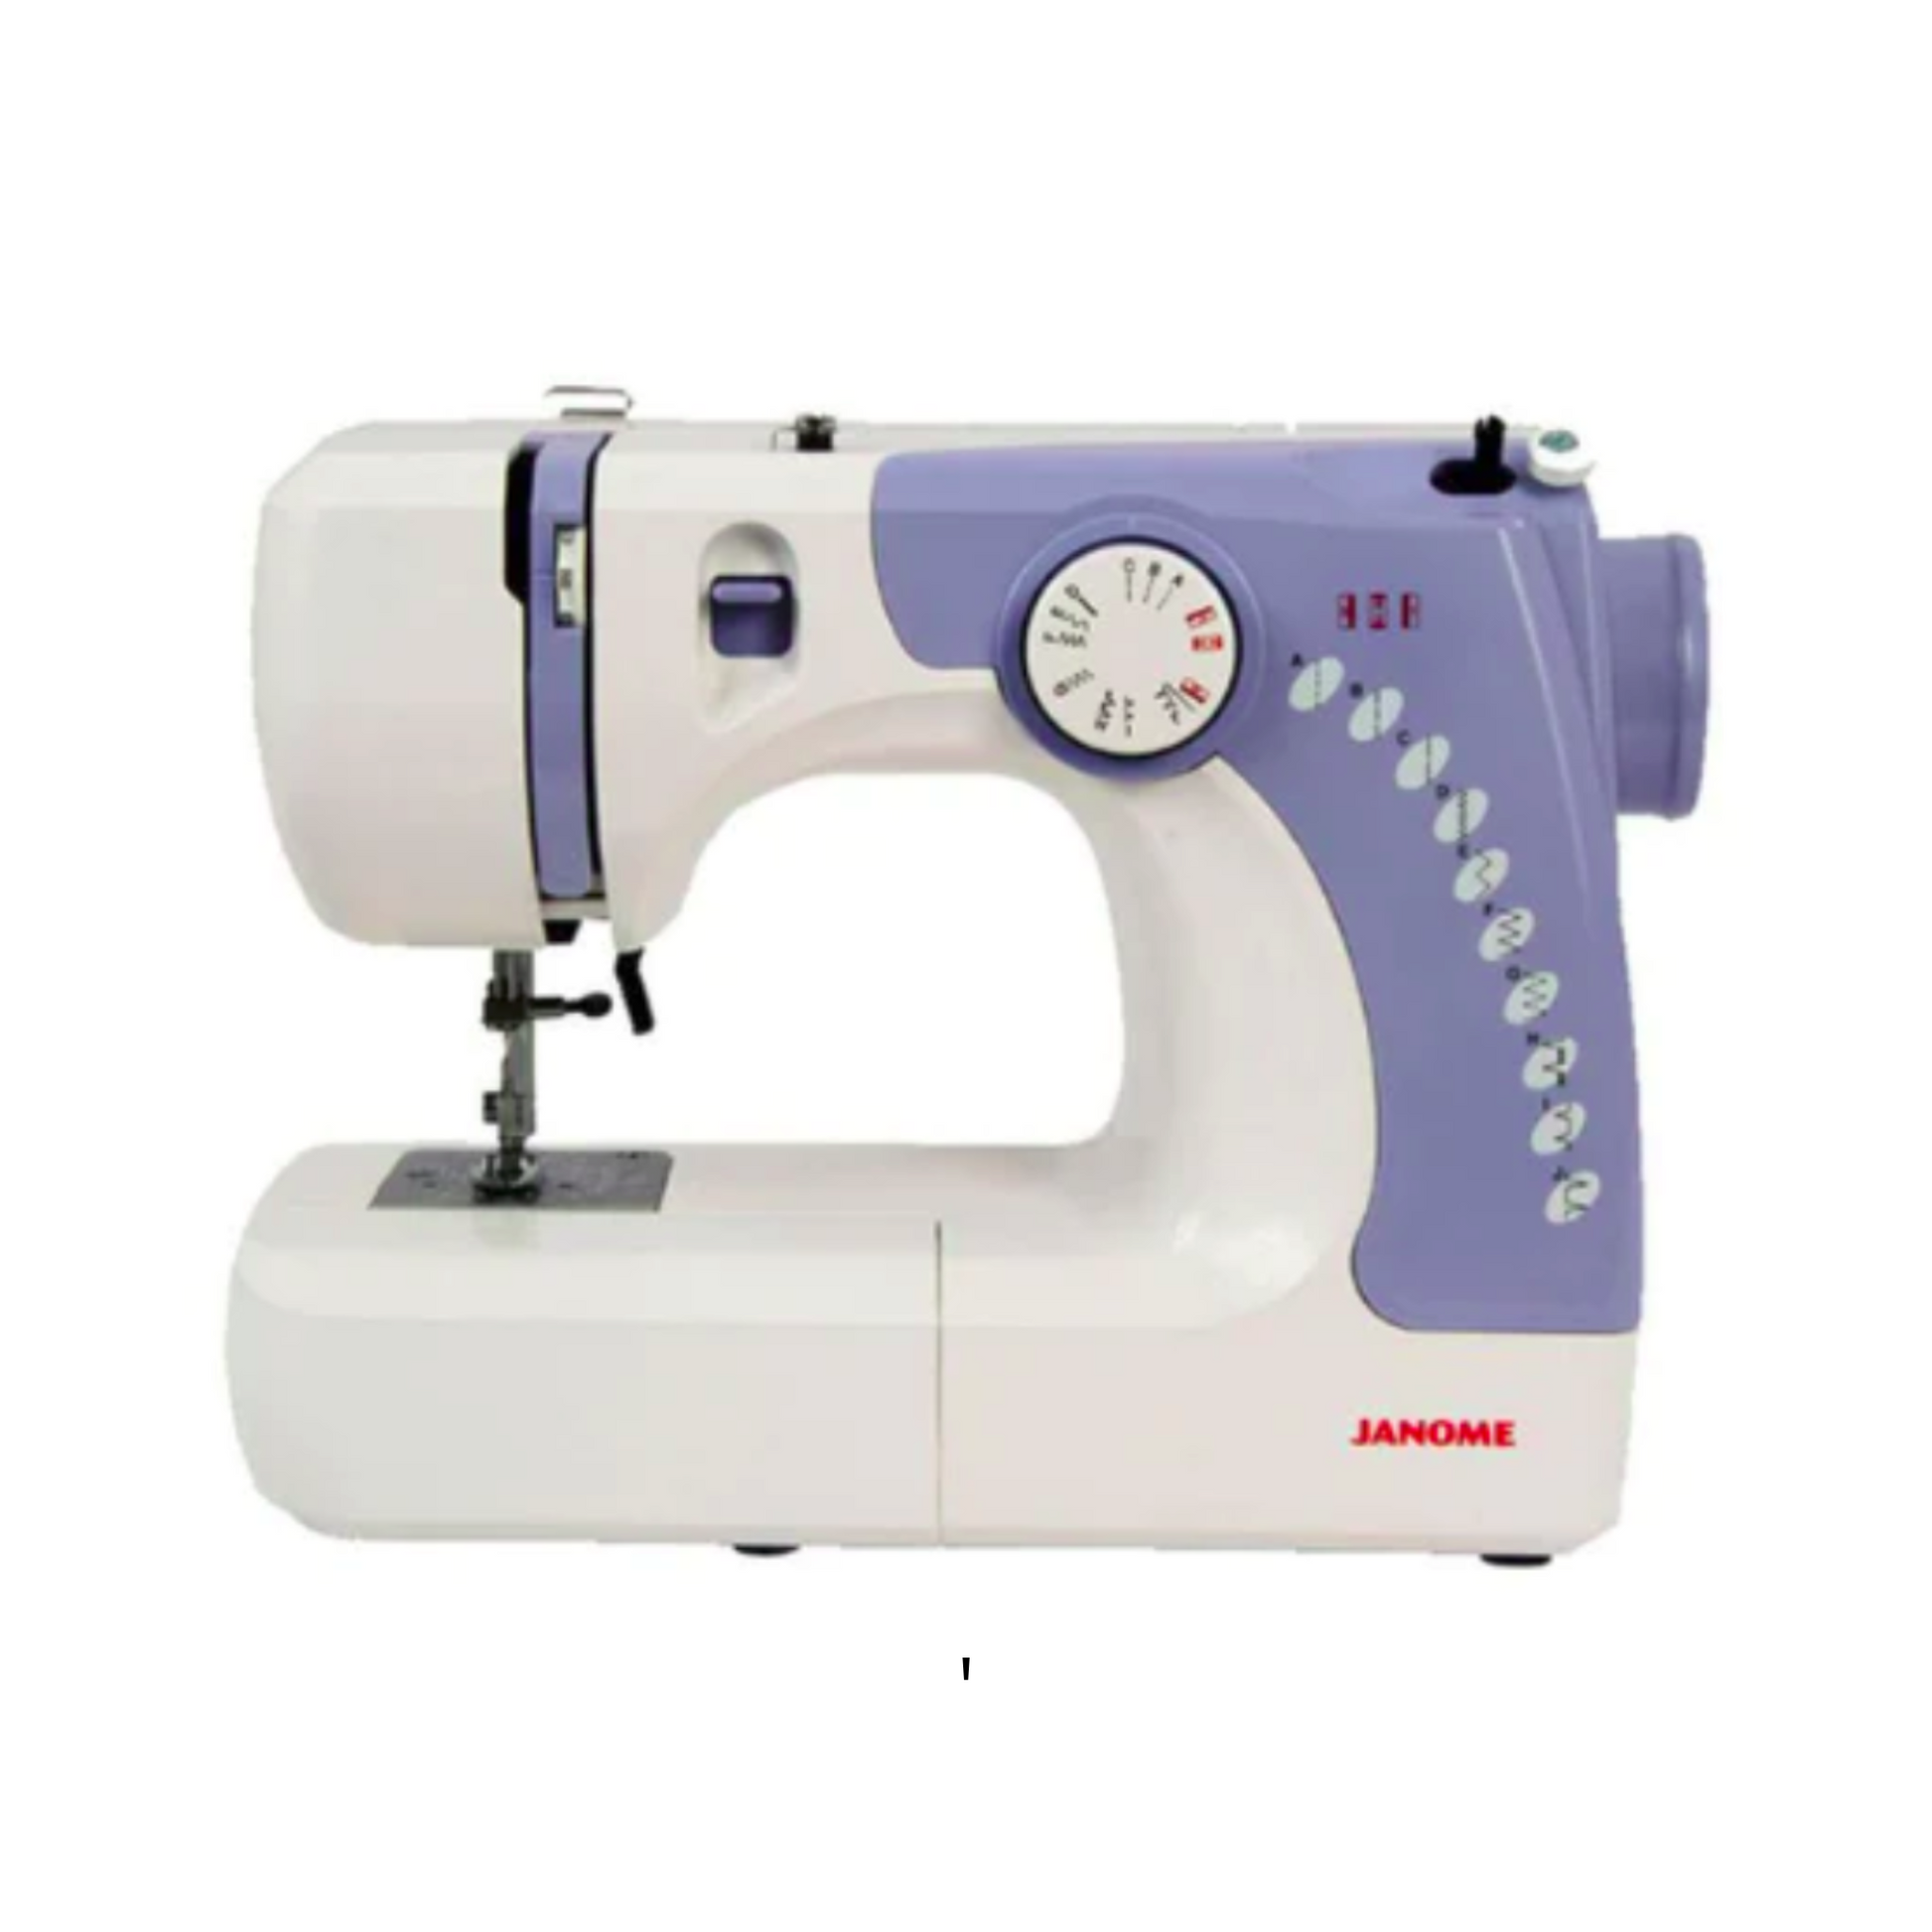 Janome 639x - Sewing machine - White - Front view